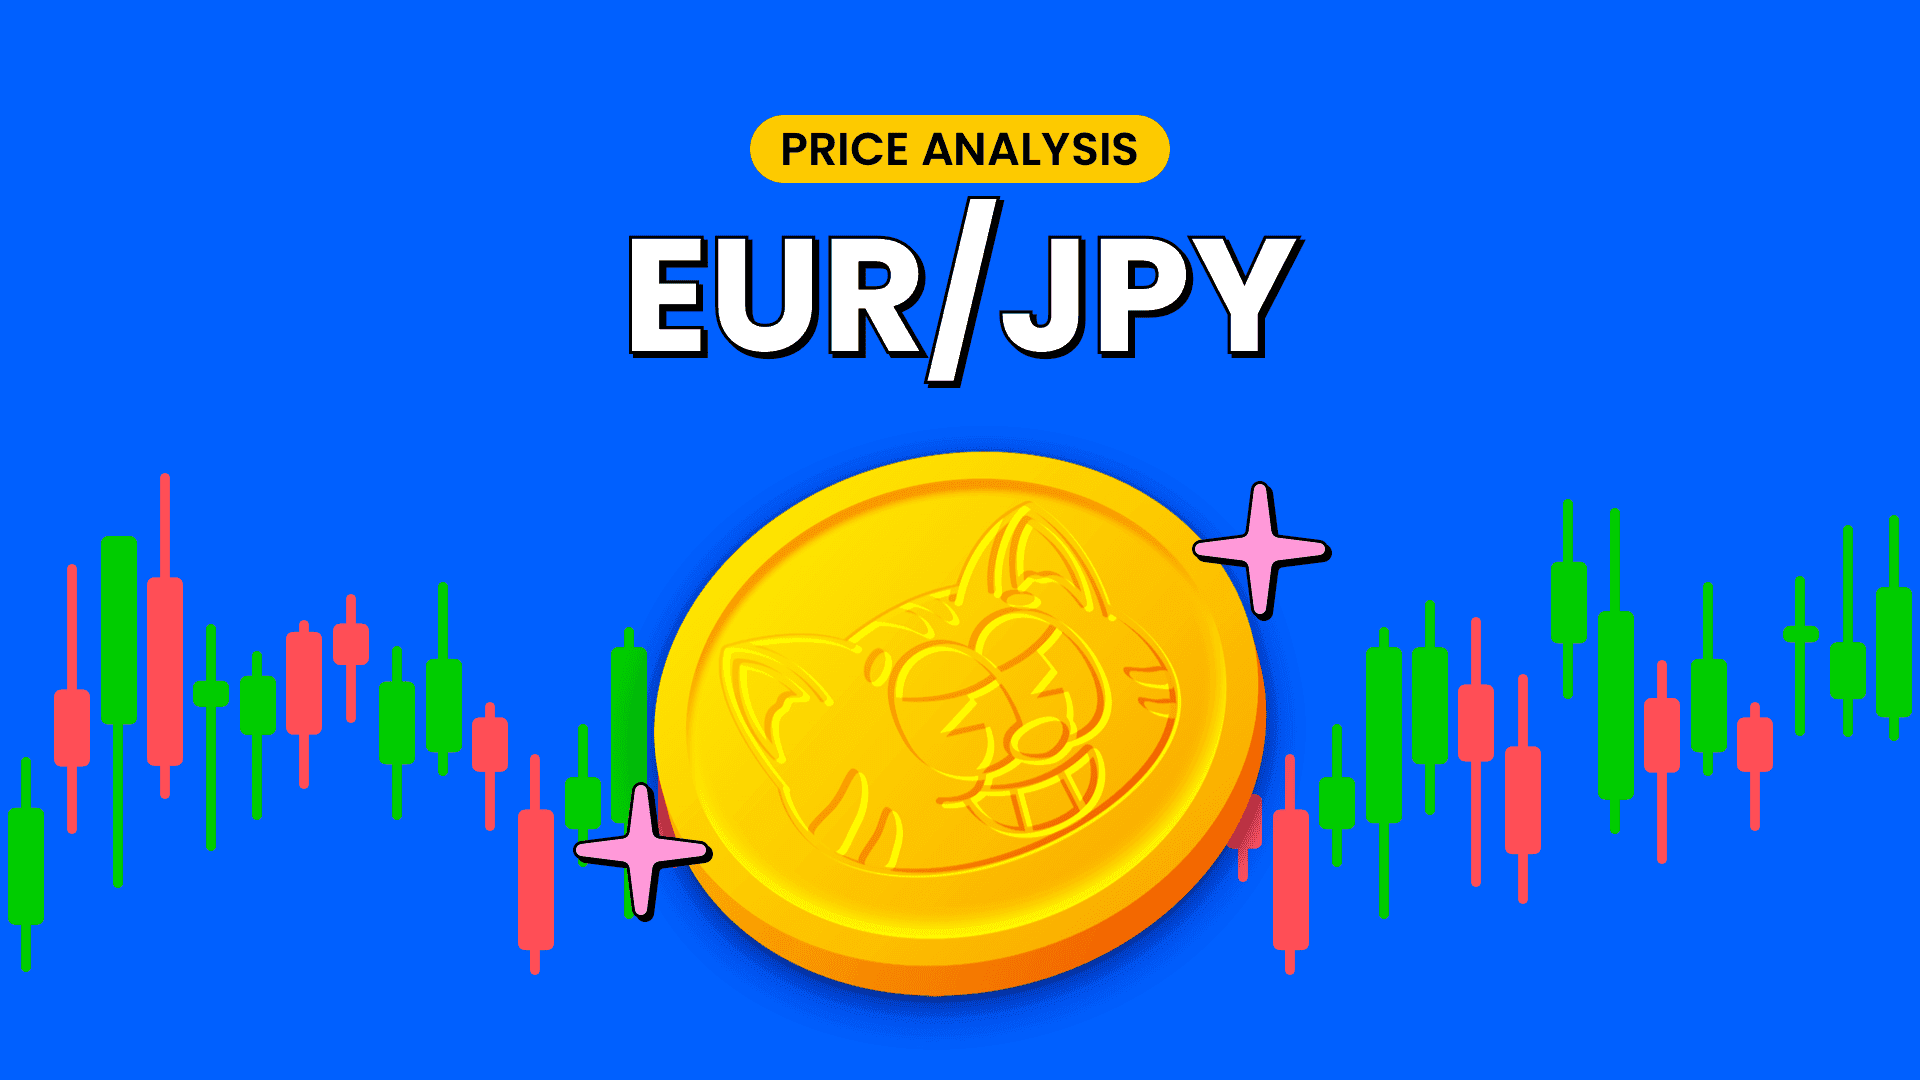 EURJPY-Struggles-To-Extend-Beyond-140-Level-Despite-Hawkish-Top-ECB-Officials-Statements-Feature-Image-7aEPb.png